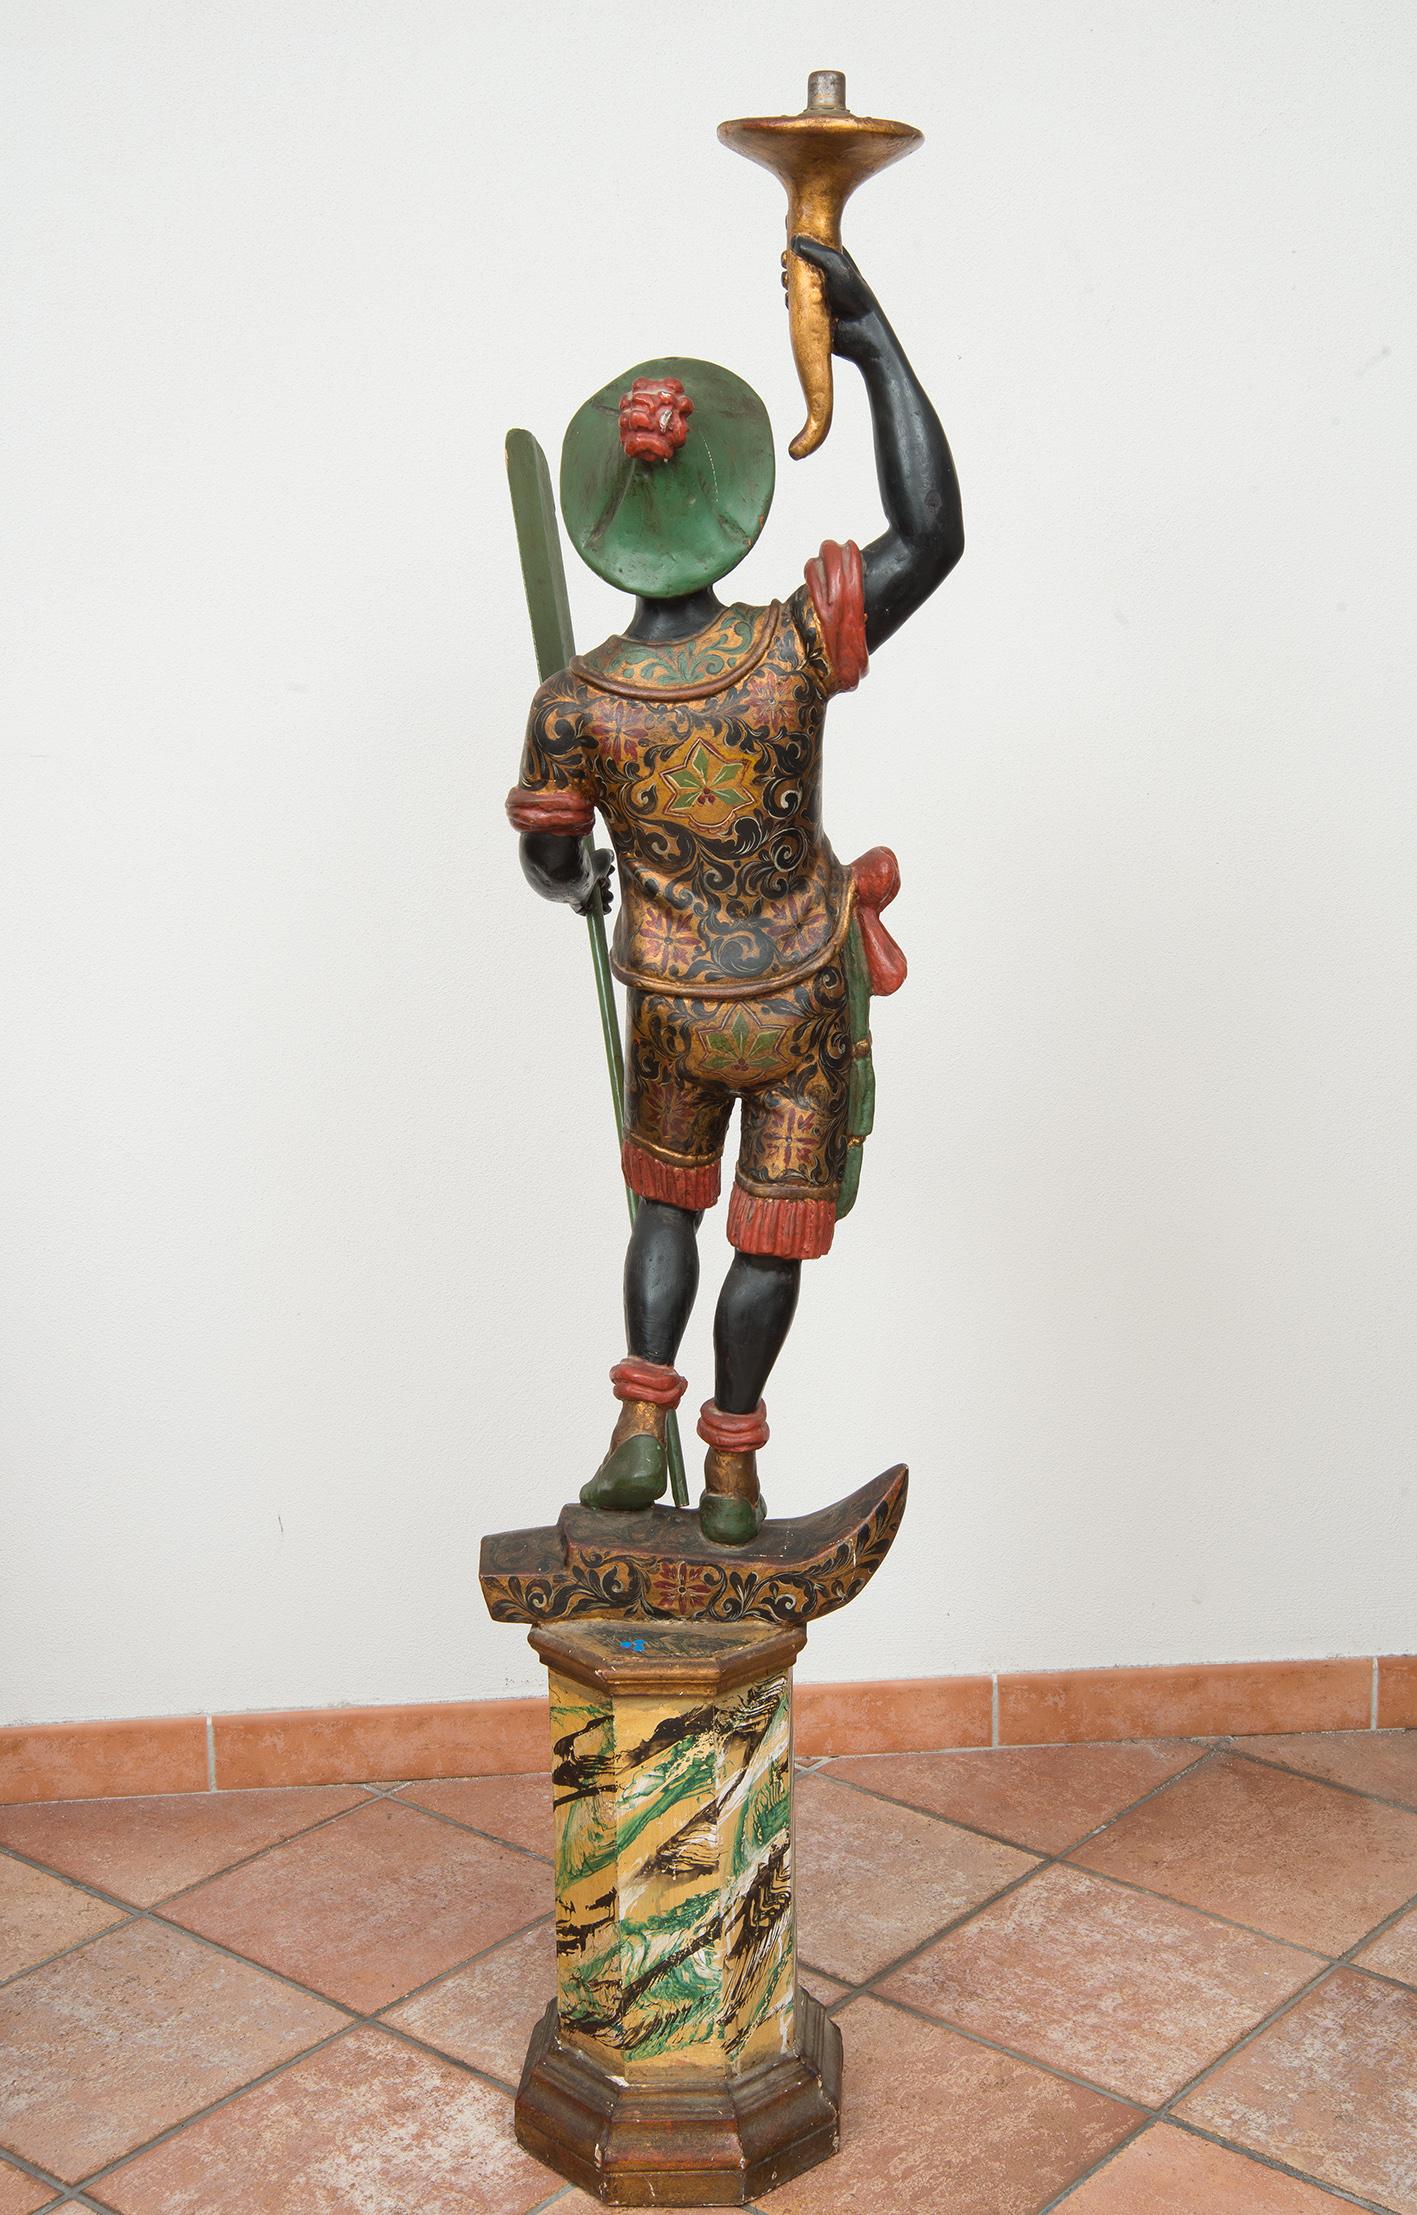 Antique polychrome wood sculpture depicting the Moor of Venice.19th century - Brown Figurative Sculpture by Unknown